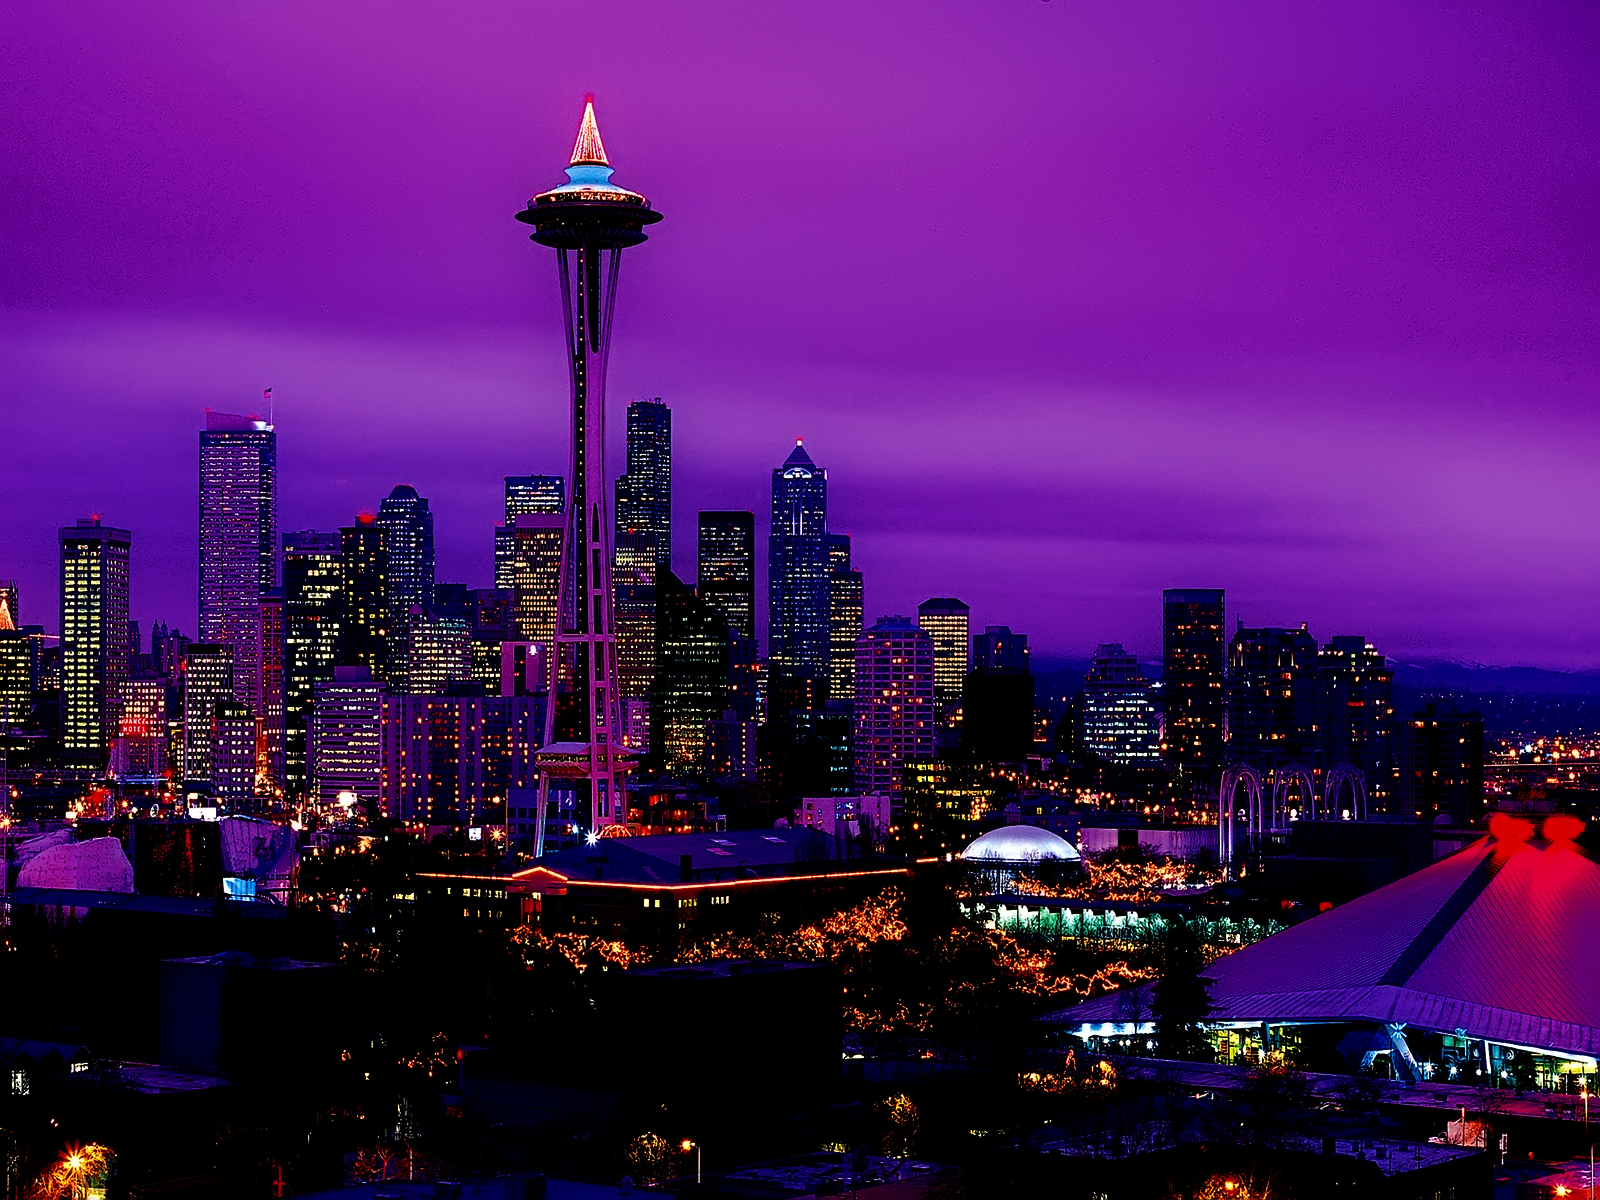 Seattle Night Skyline wallpaper Republicans Immigration and